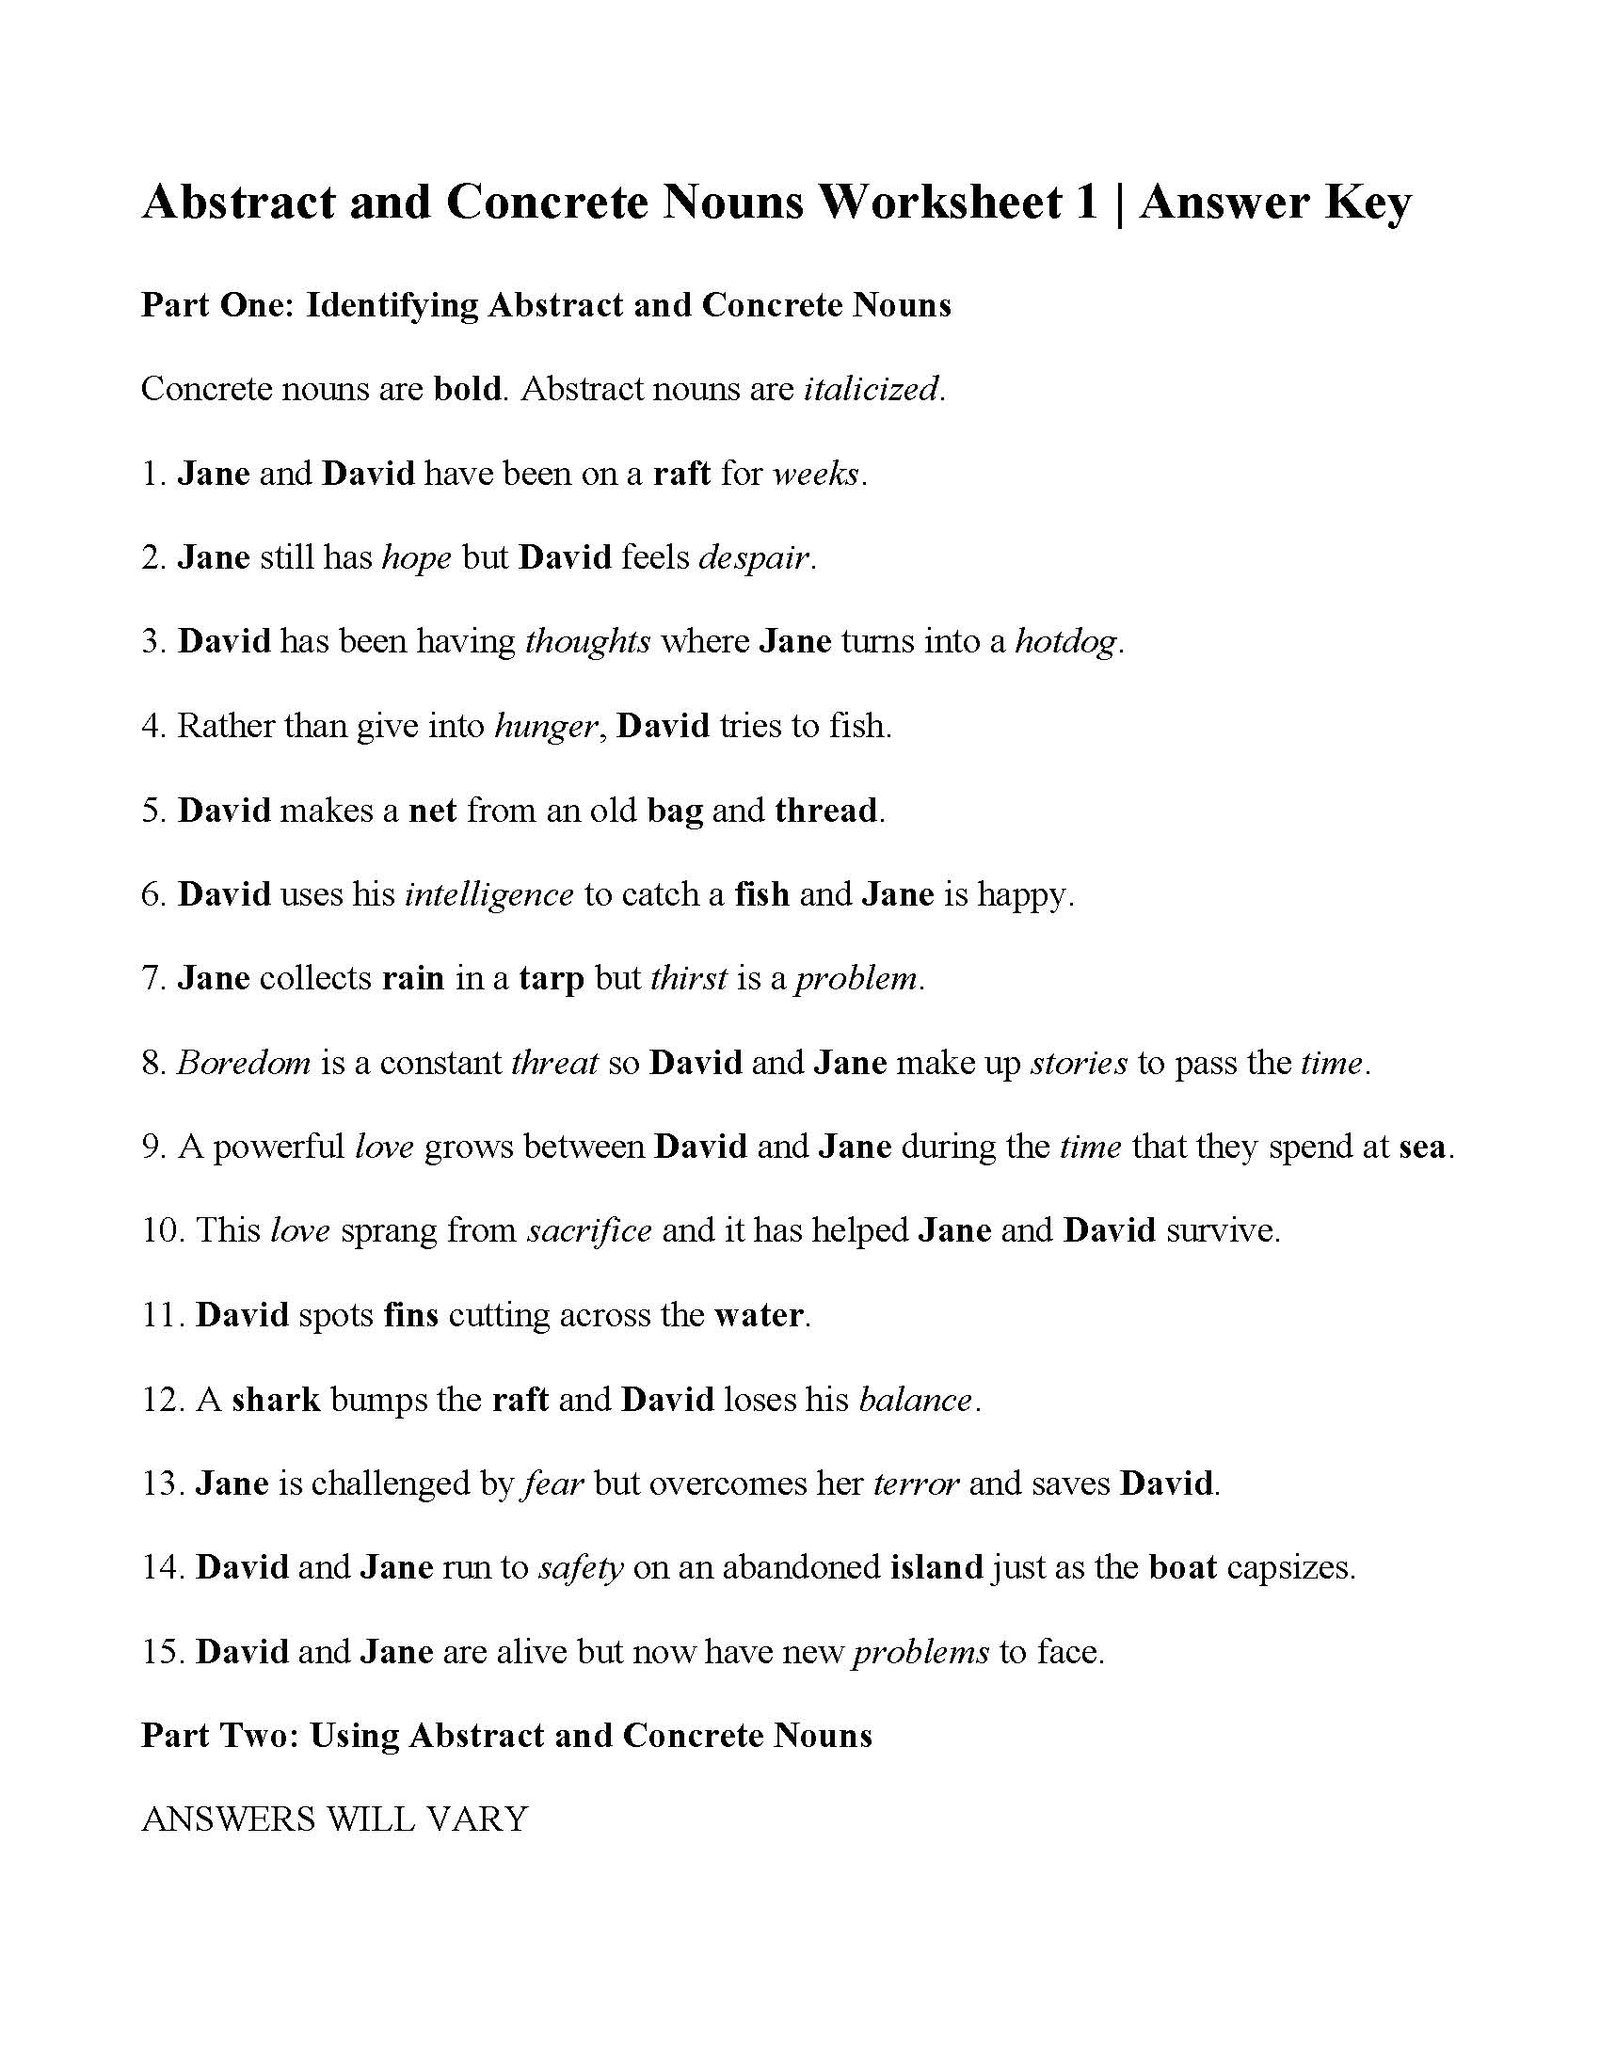 Common Proper And Abstract Nouns Worksheet